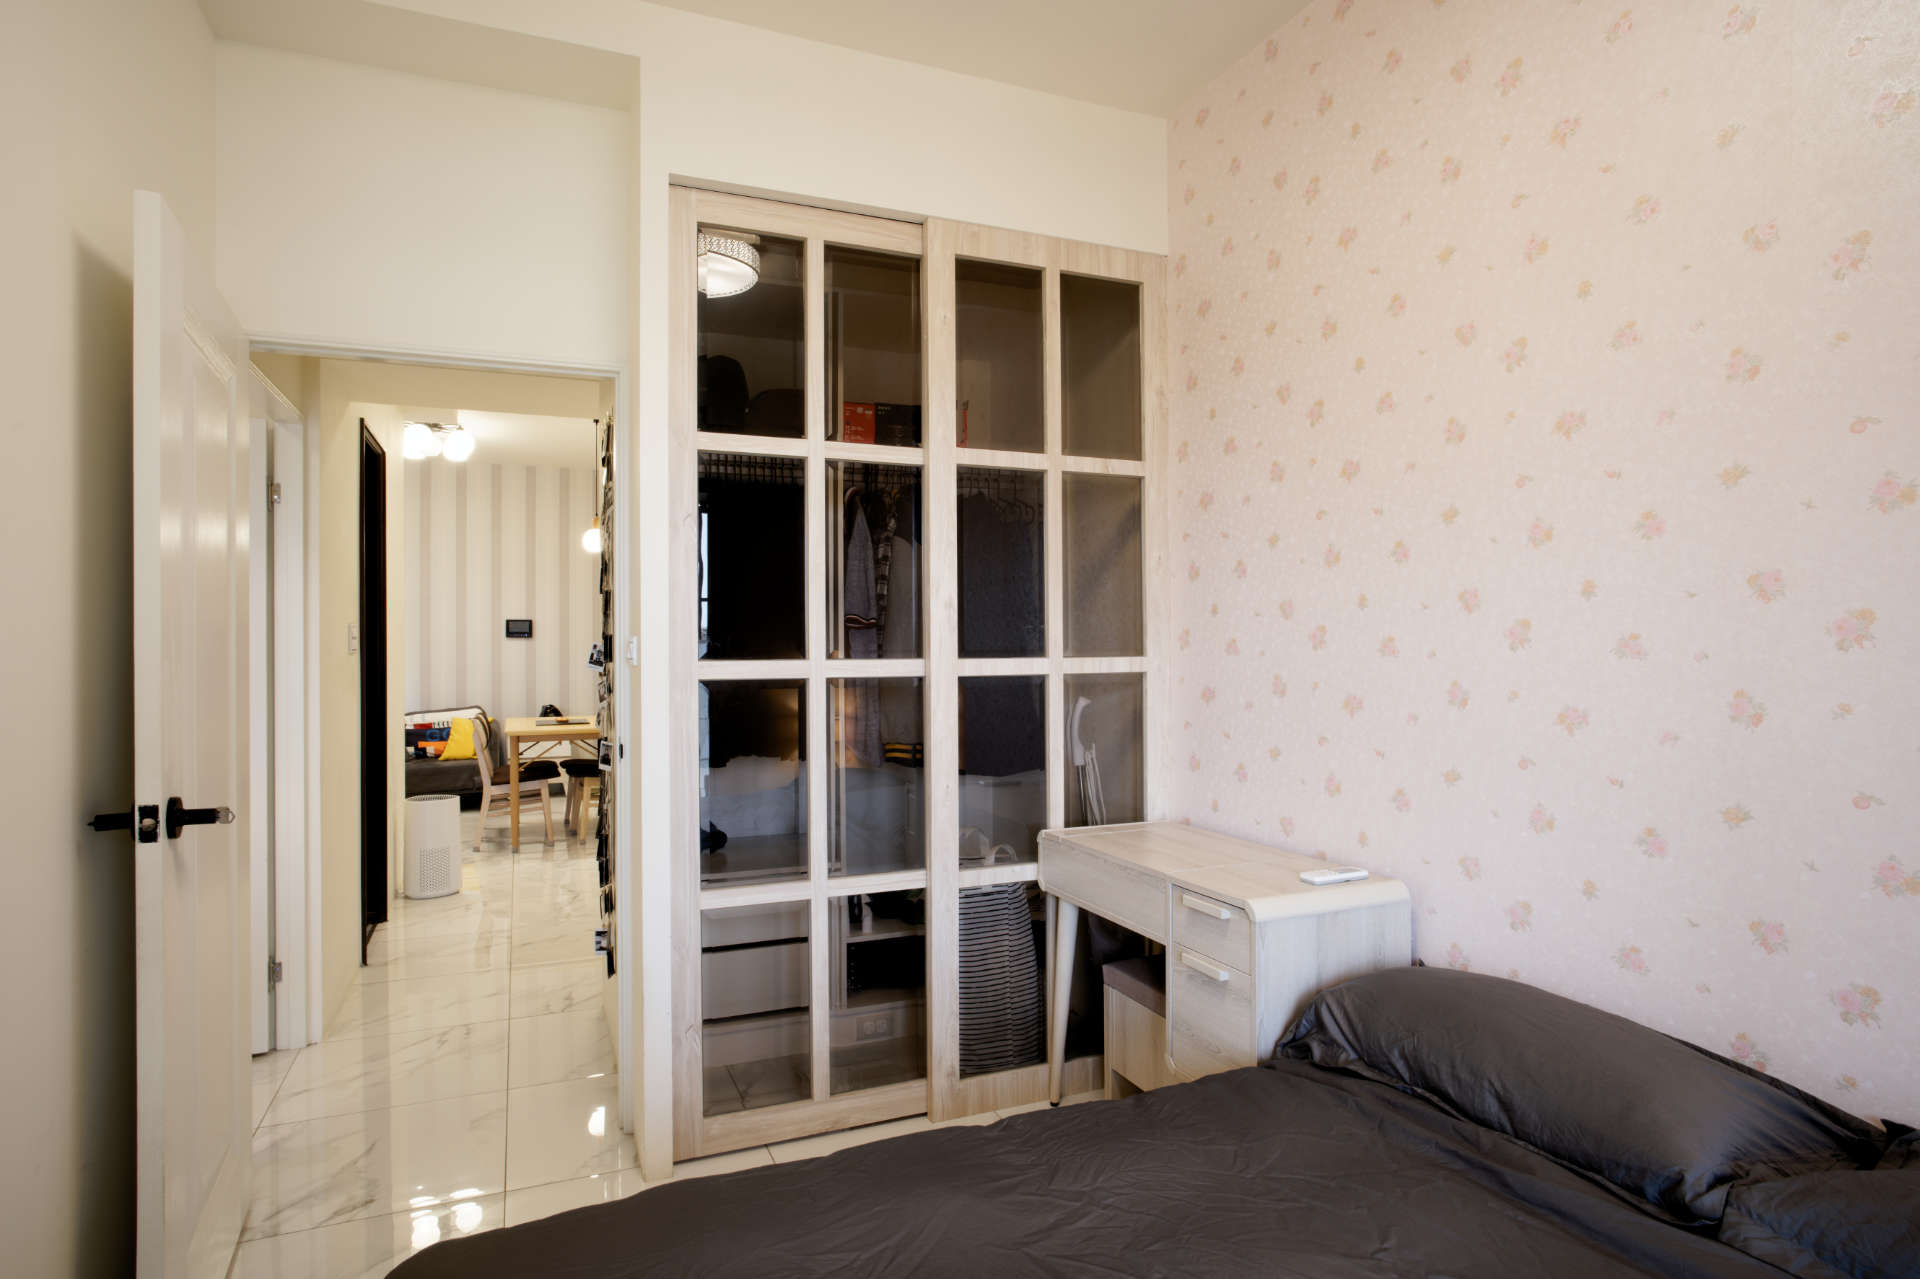 A bedroom with double bed in the foreground, a make-up table, and a glass-panelled wardrobe.